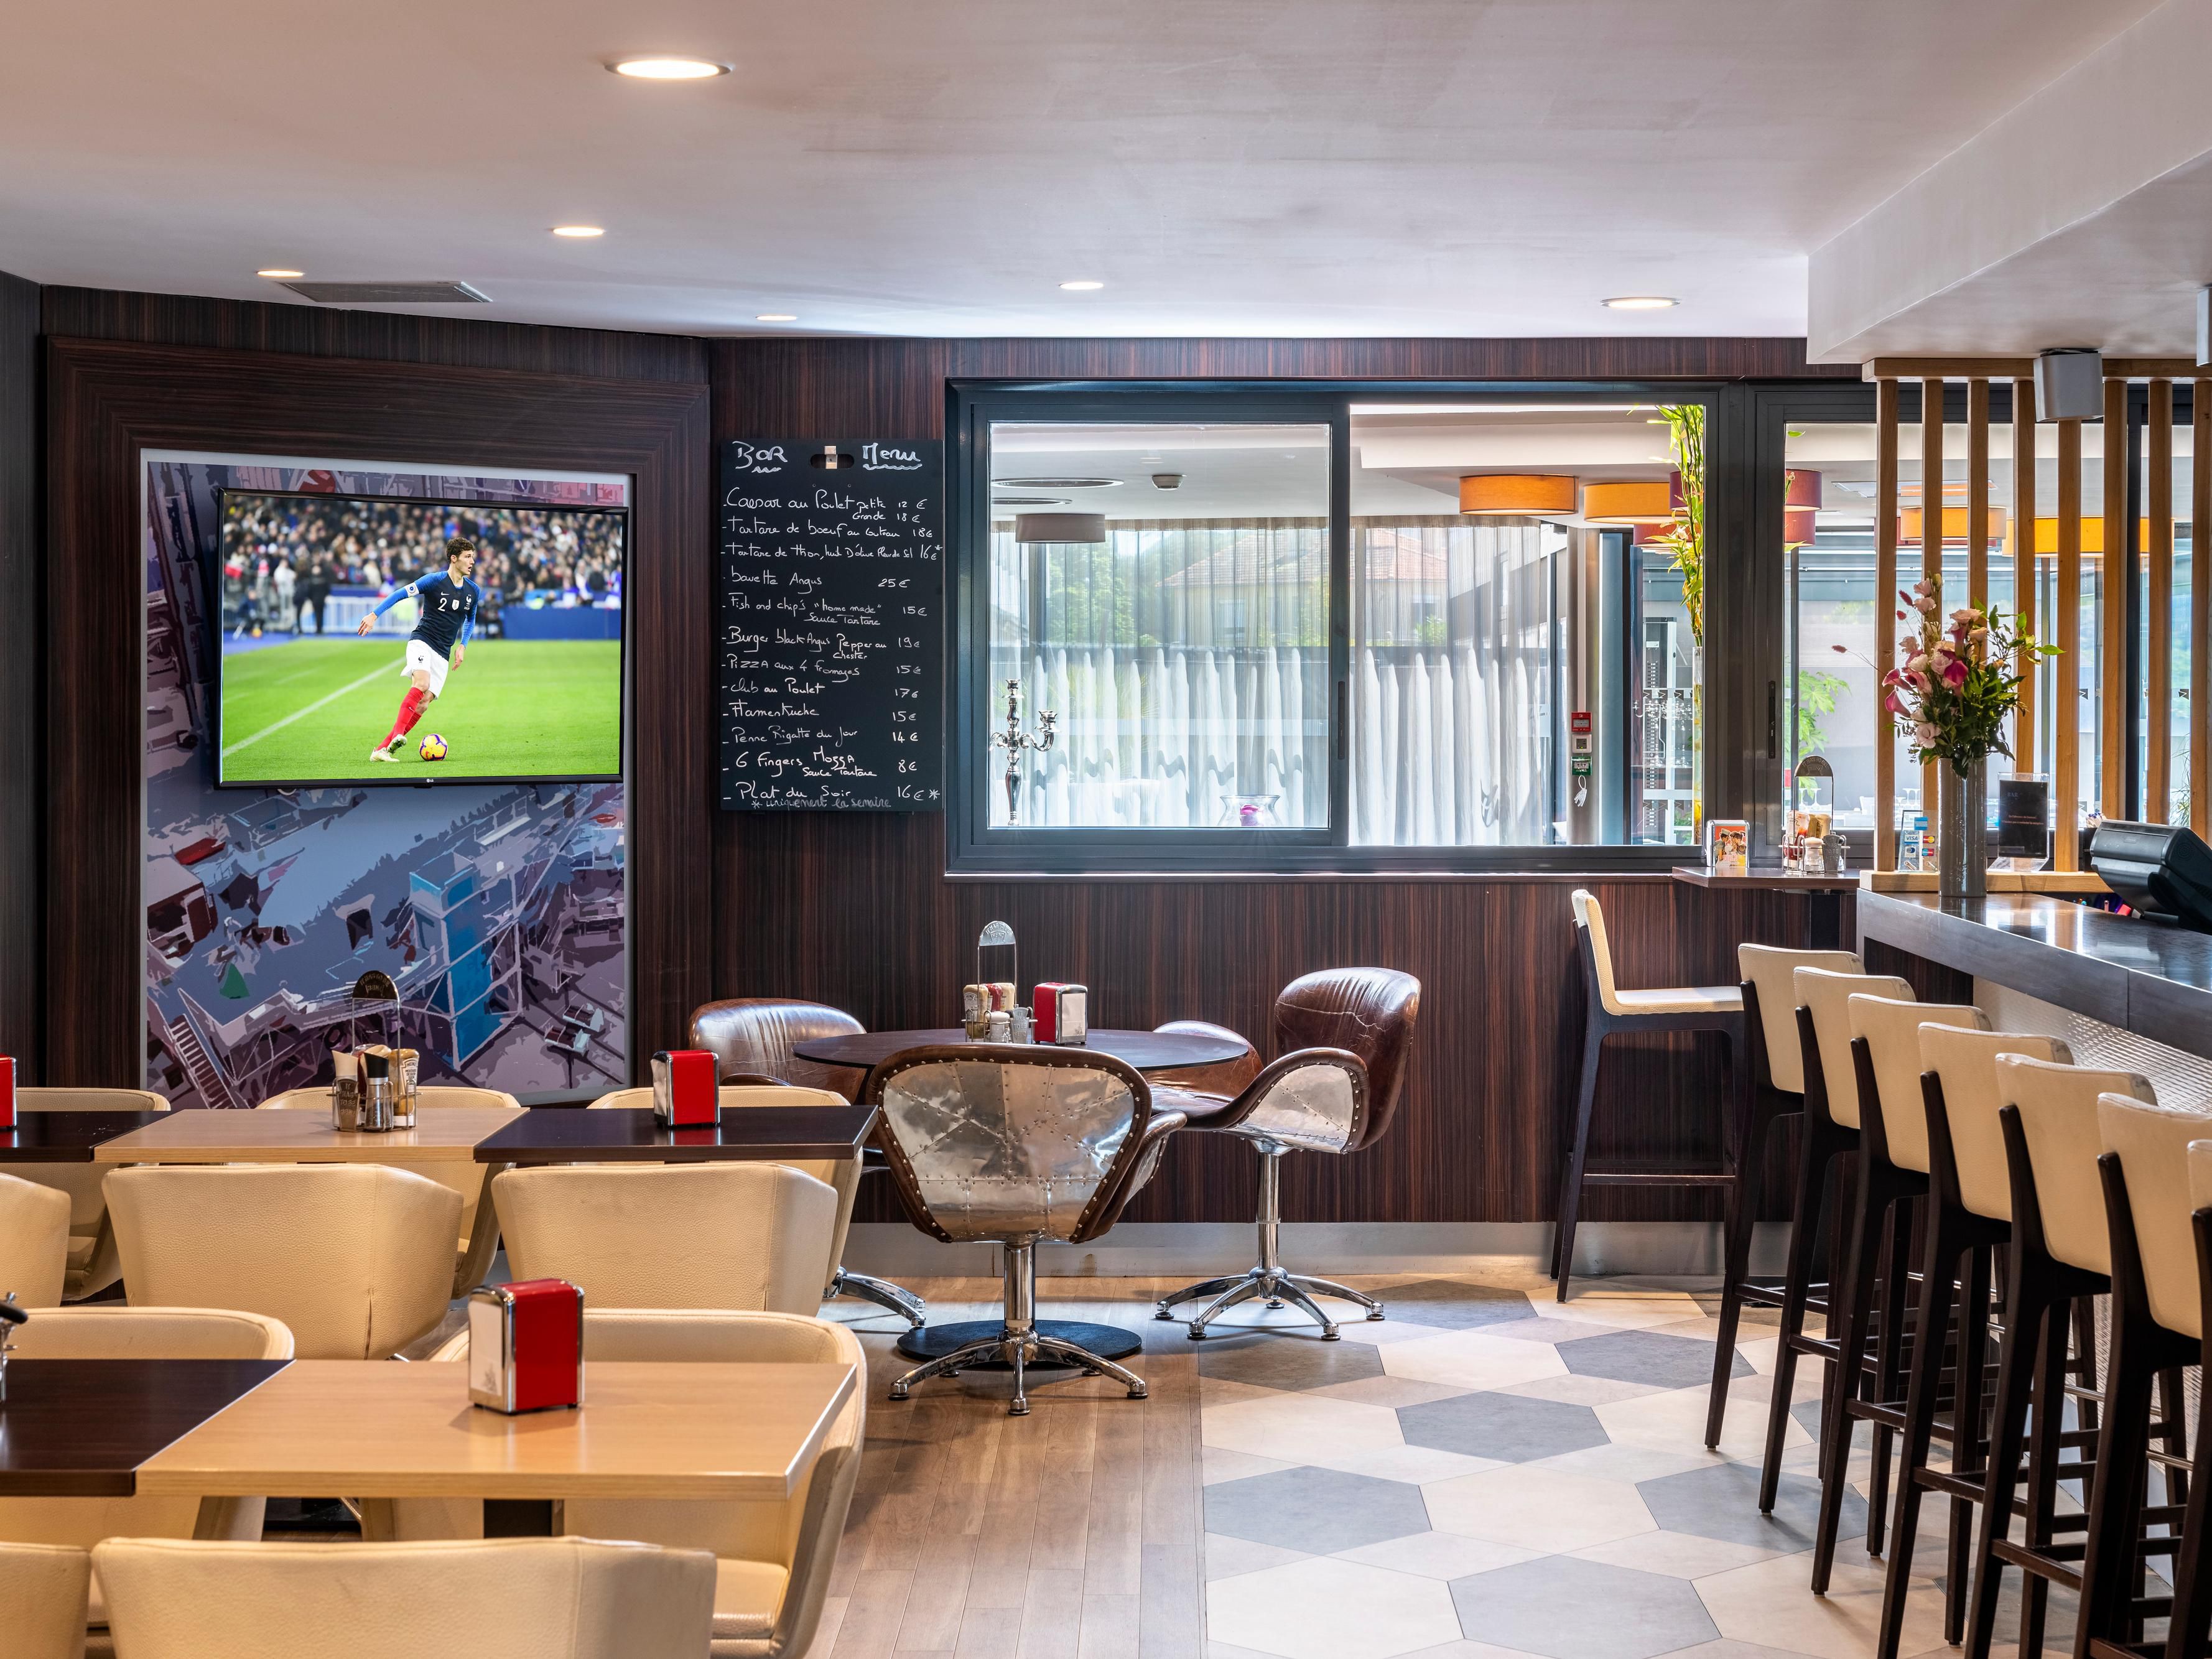 Come and enjoy our happy hour from 5pm to 7pm from Monday to Friday. 
On match days, support your favourite team with our 4 giants screens around our 7 draught beers, cocktails with snacks!